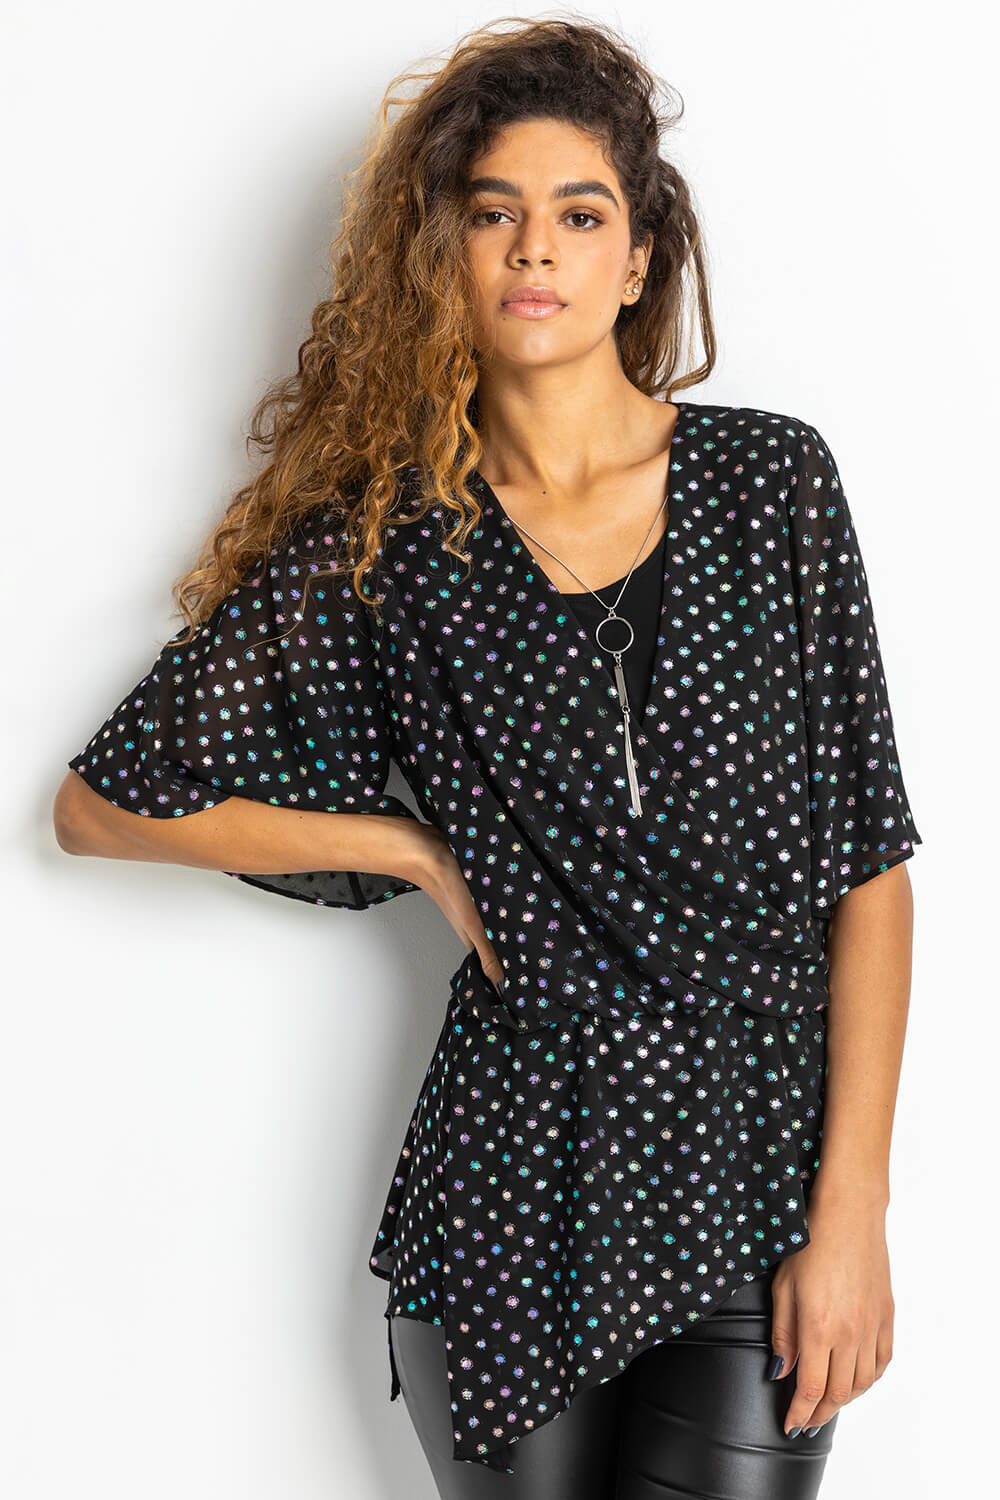 Black Foil Spot Print Top and Necklace, Image 1 of 4